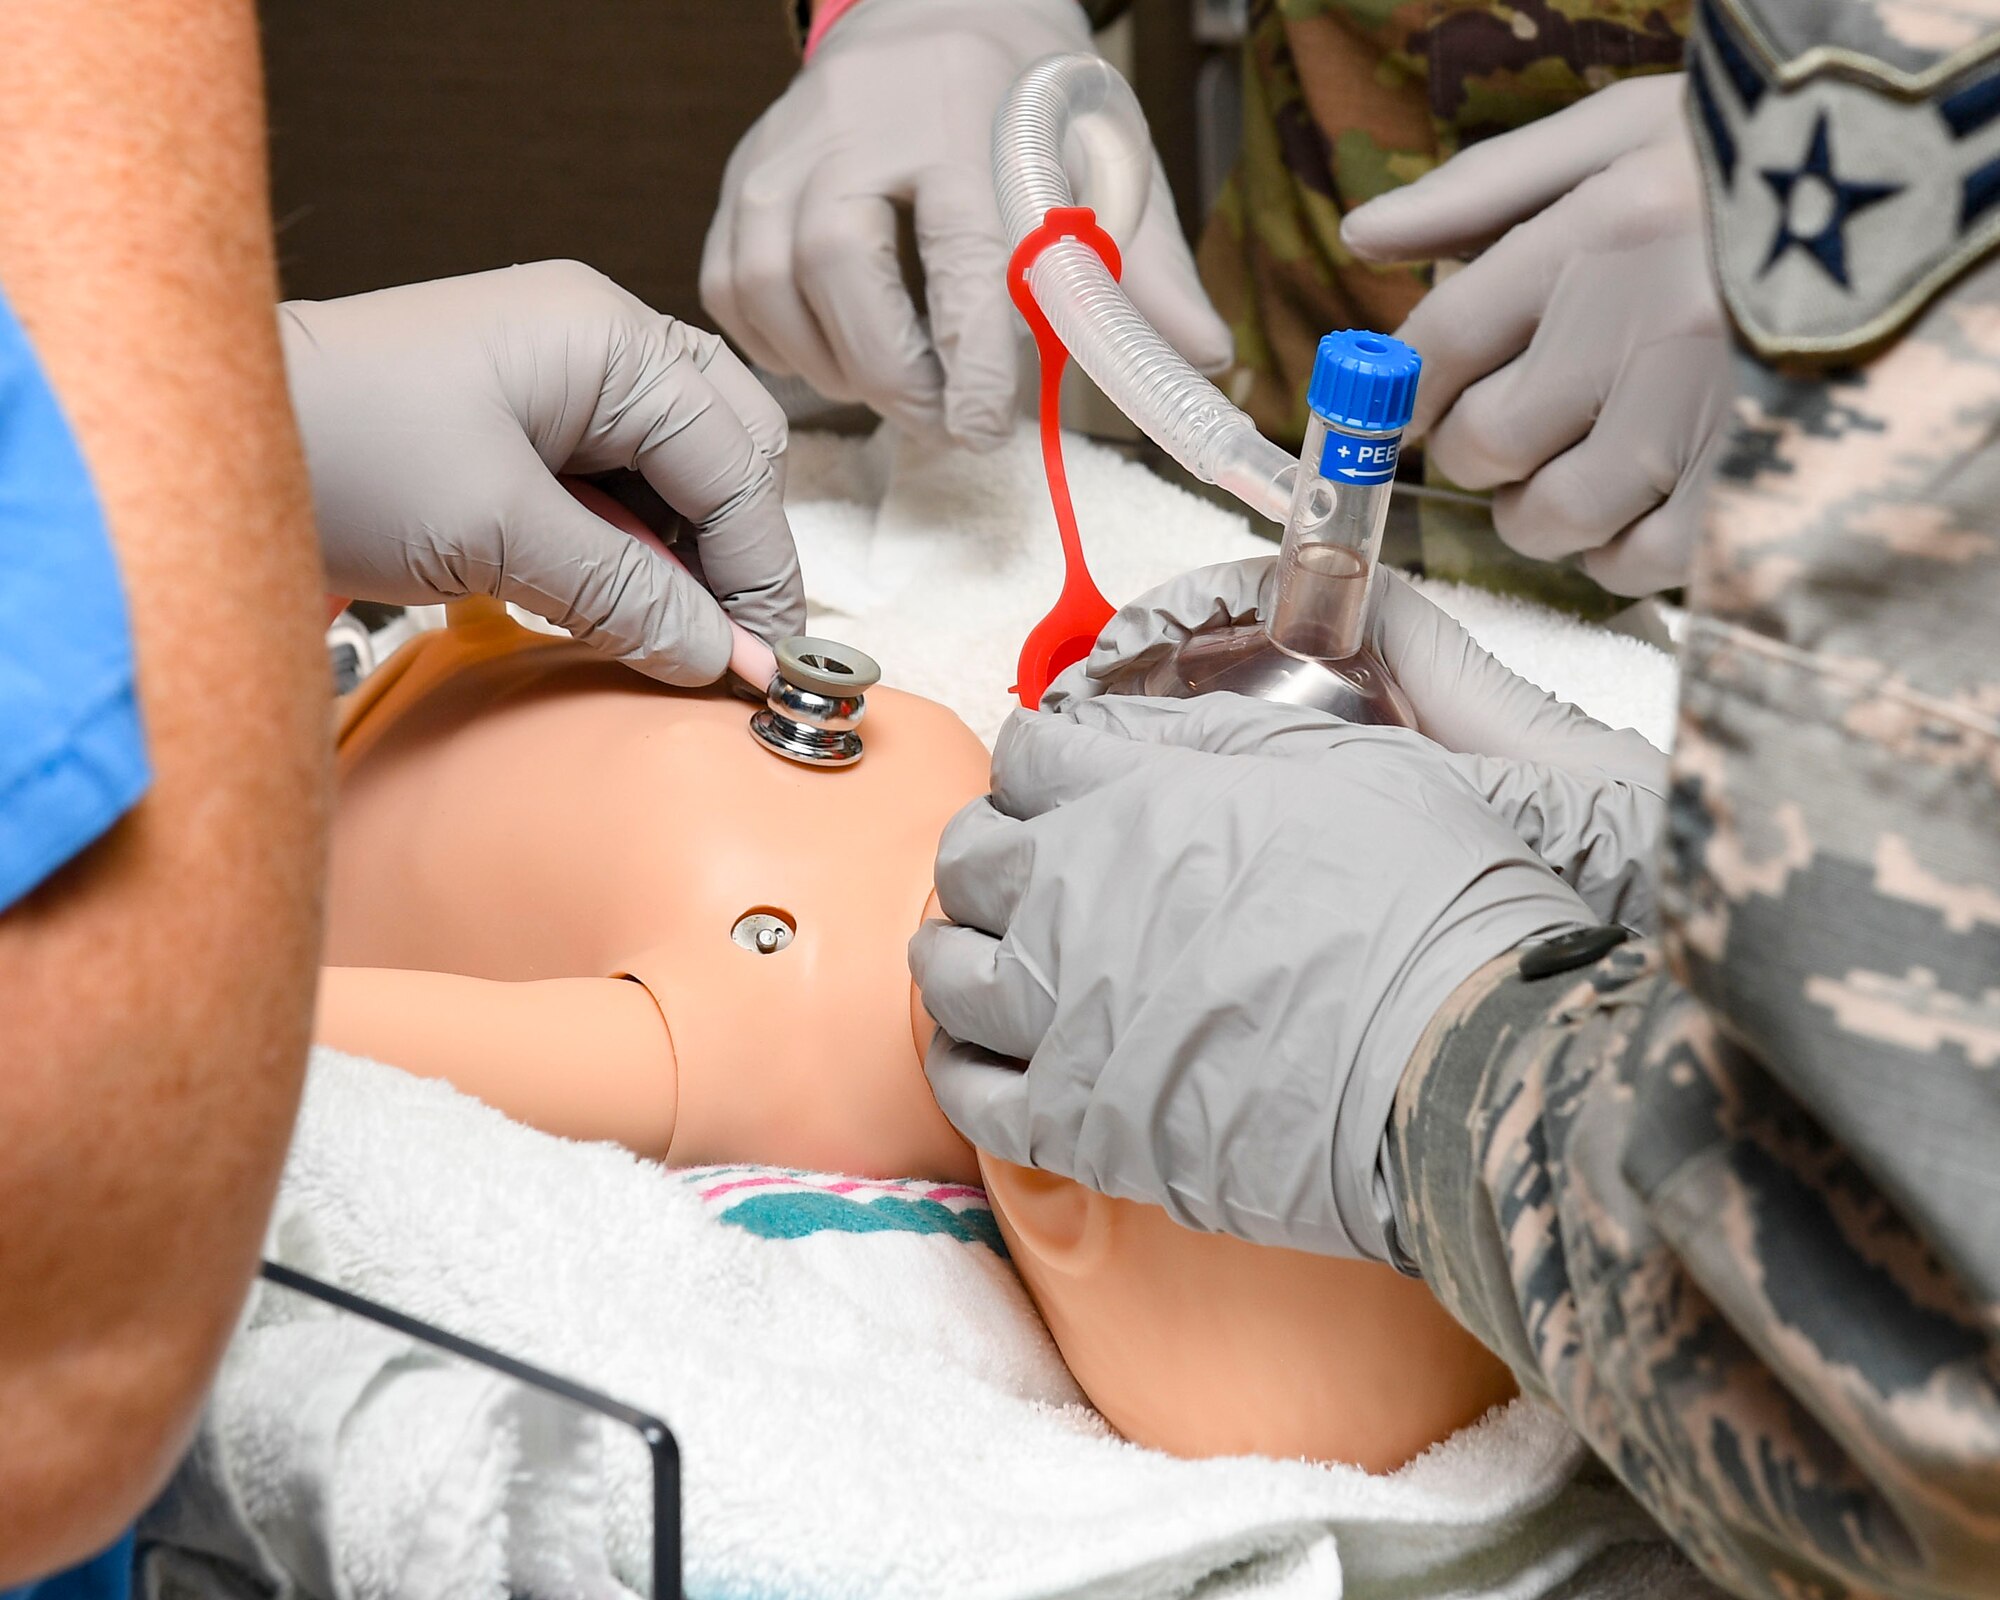 Airman 1st Class Monique Wood, 633rd Medical Group medical technician gives air to a Laerdal SimNewB simulator, July 10, 2019, at Joint Base Langley-Eustis, Virginia.